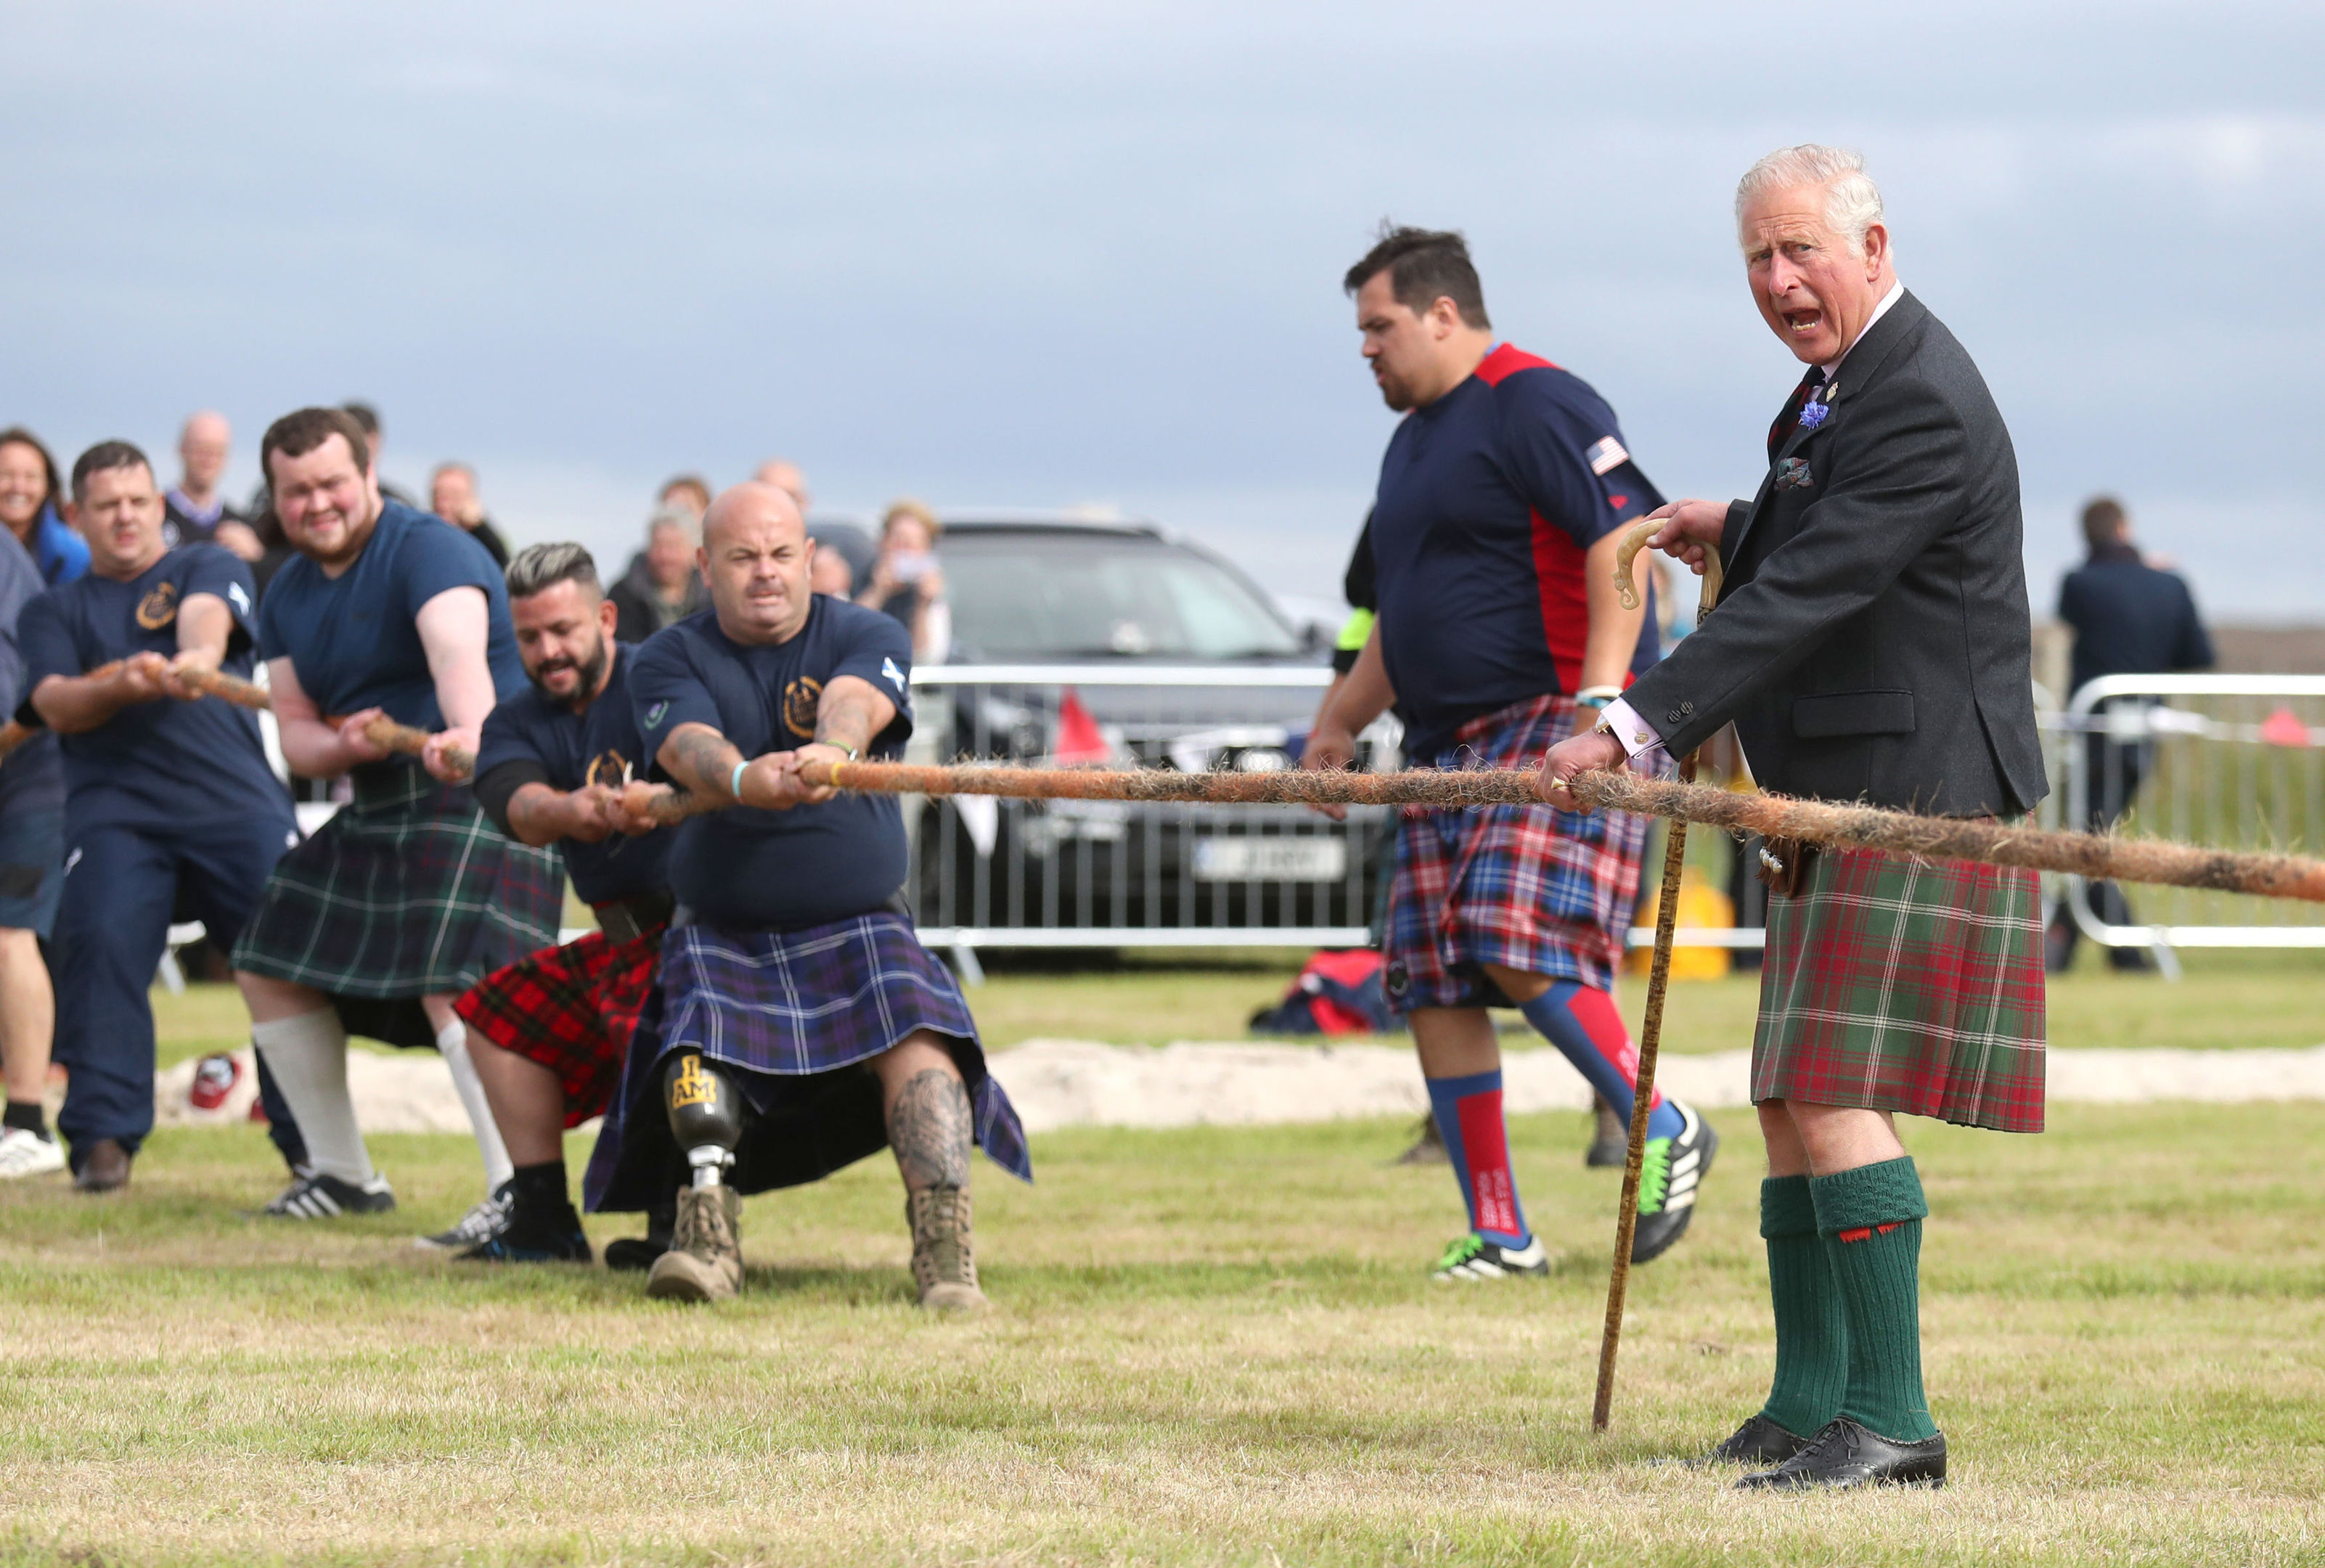 The Duke of Rothesay judging a tug-of-war competition.